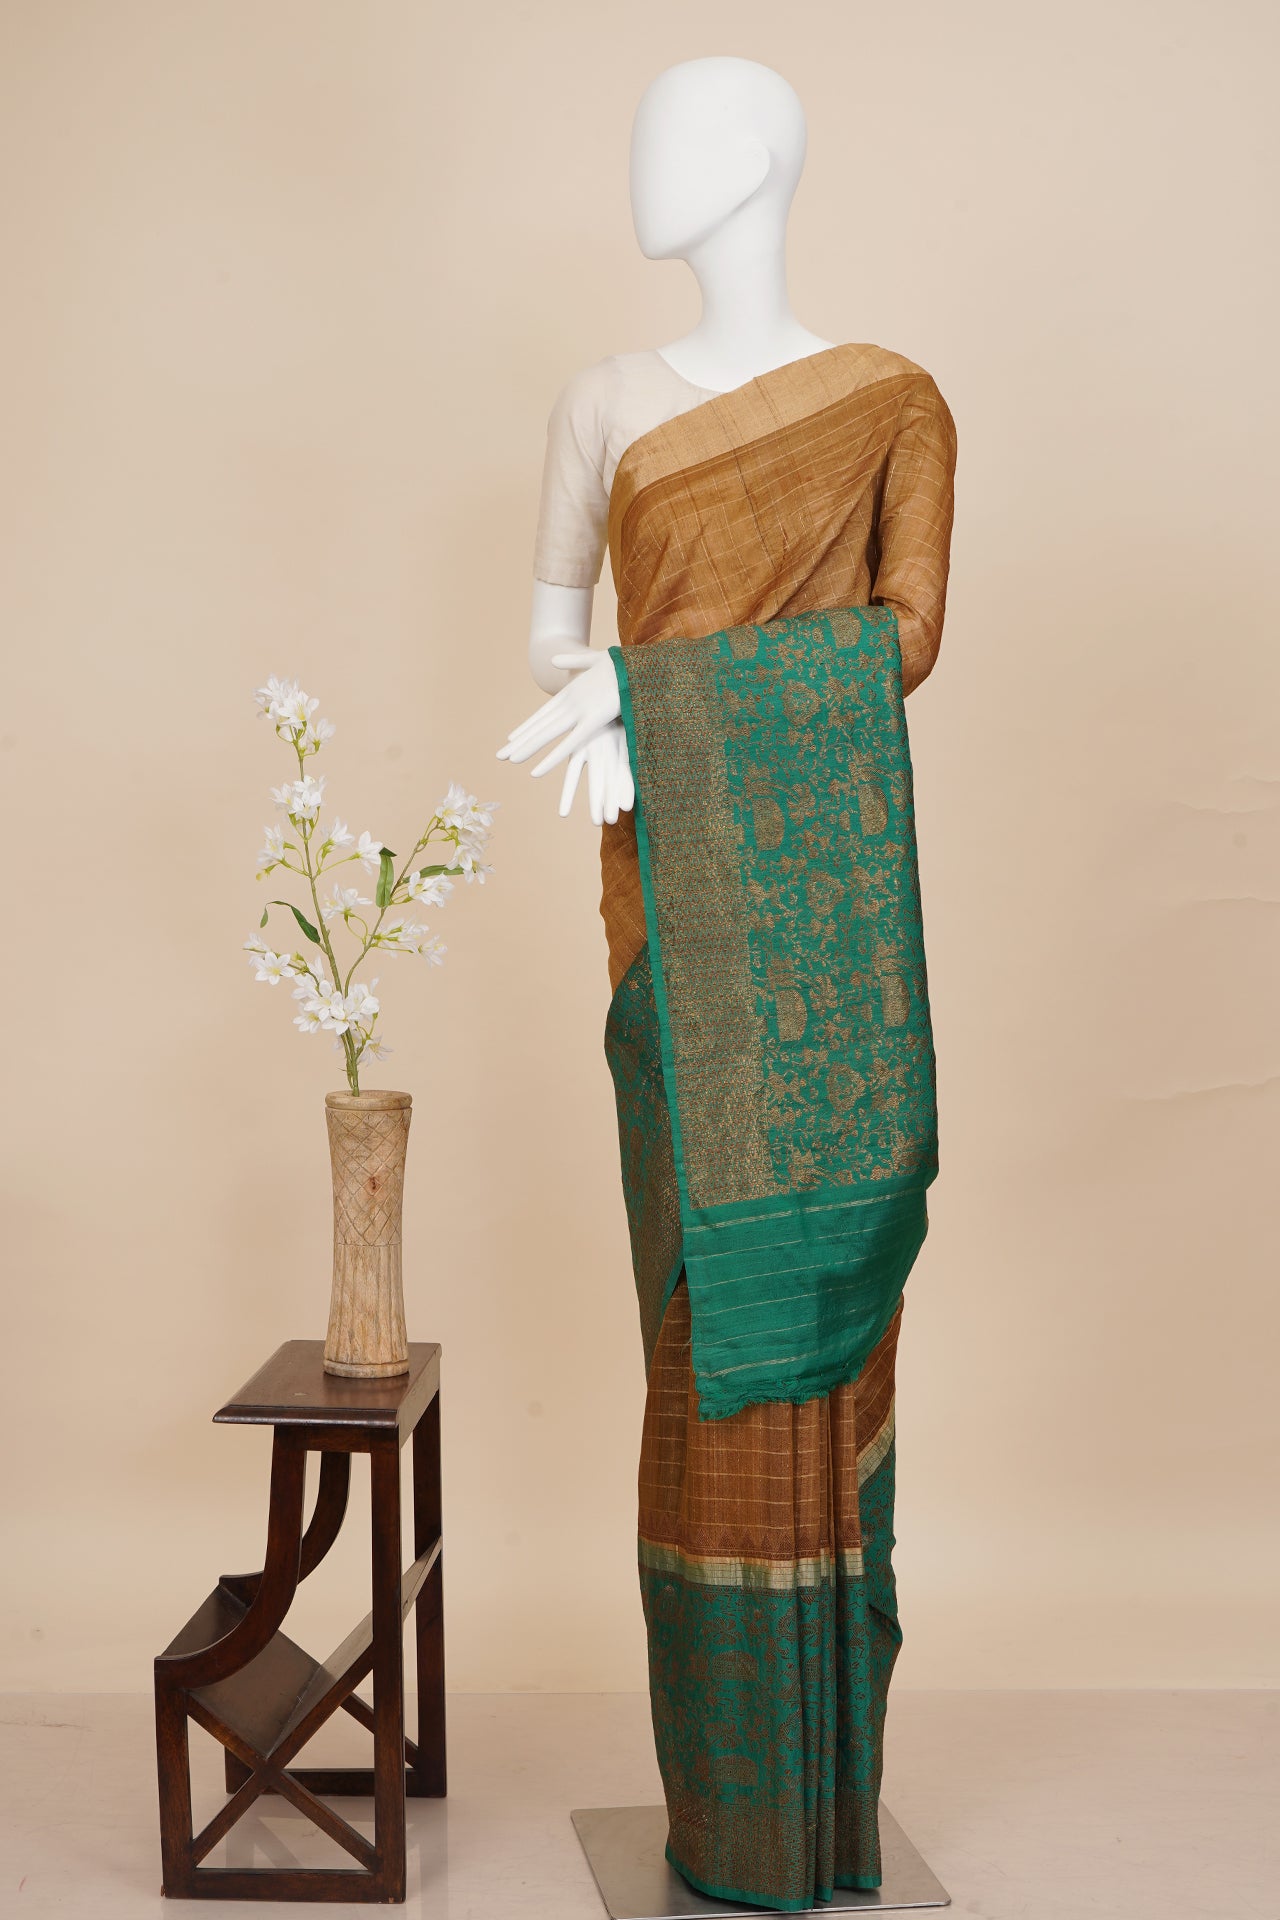 Brown-Green Color Handwoven Zari Bordered Silk Saree with Blouse Piece